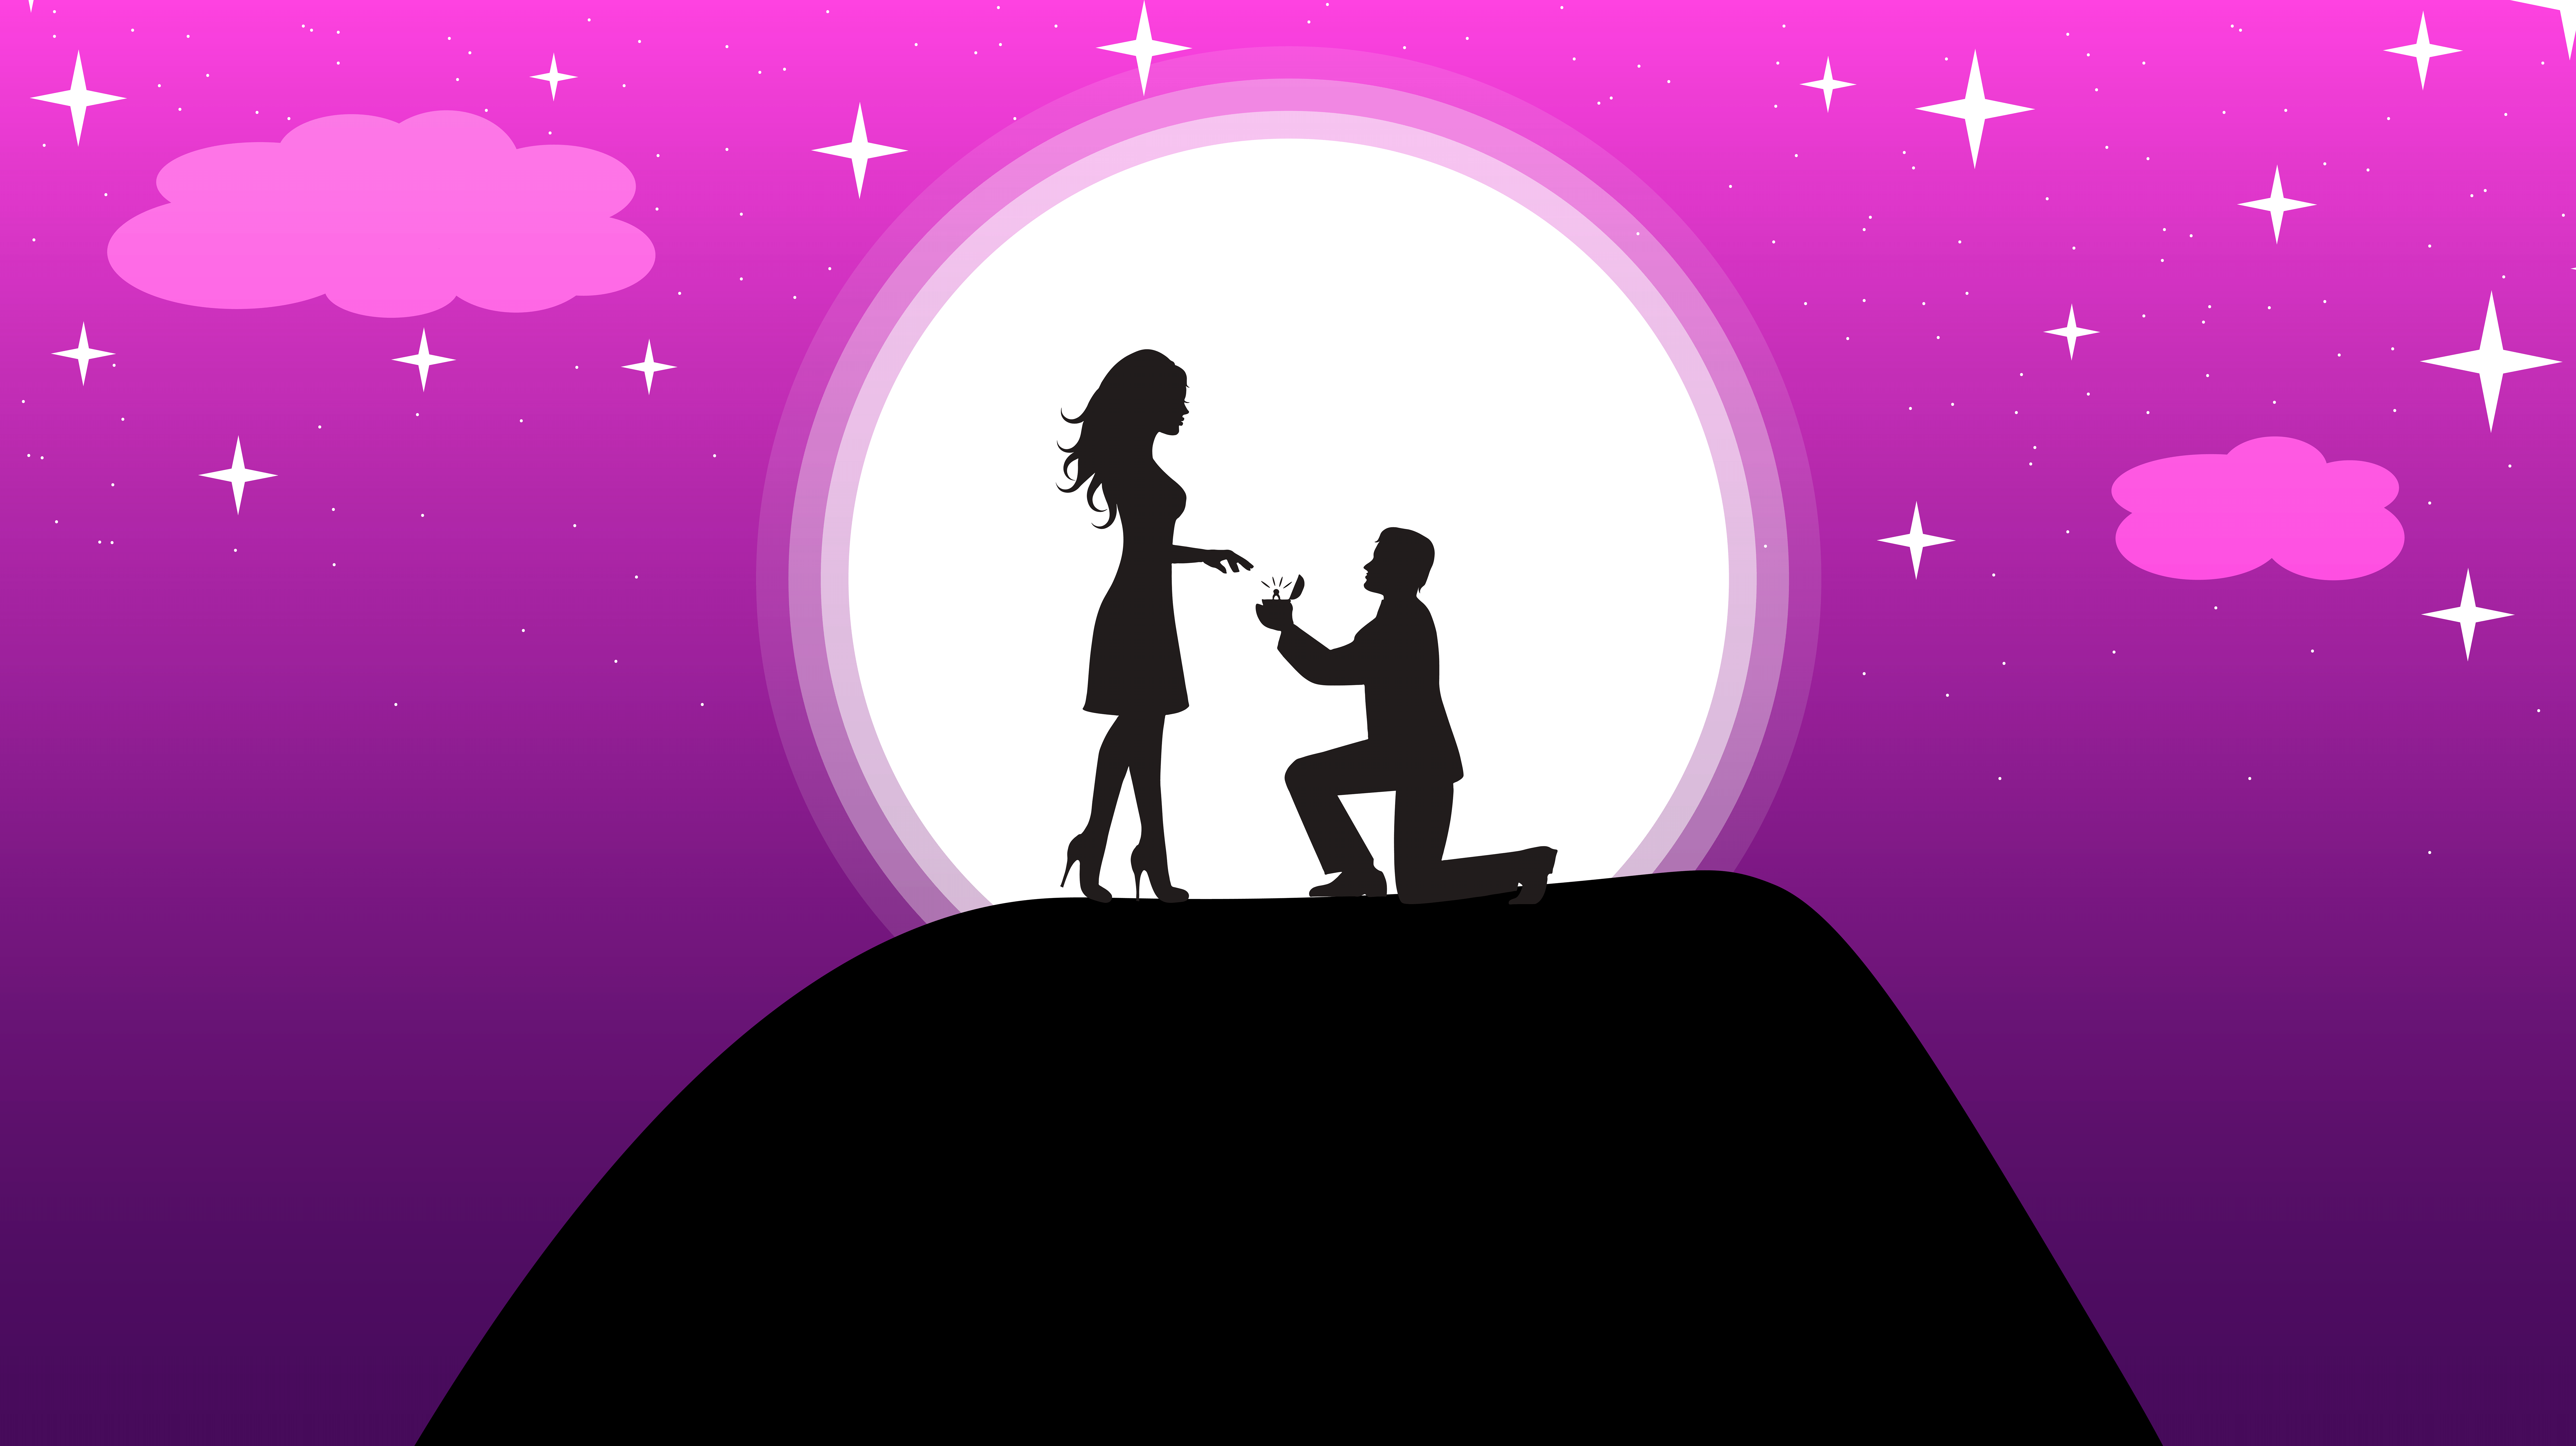 The Proposal rendition image